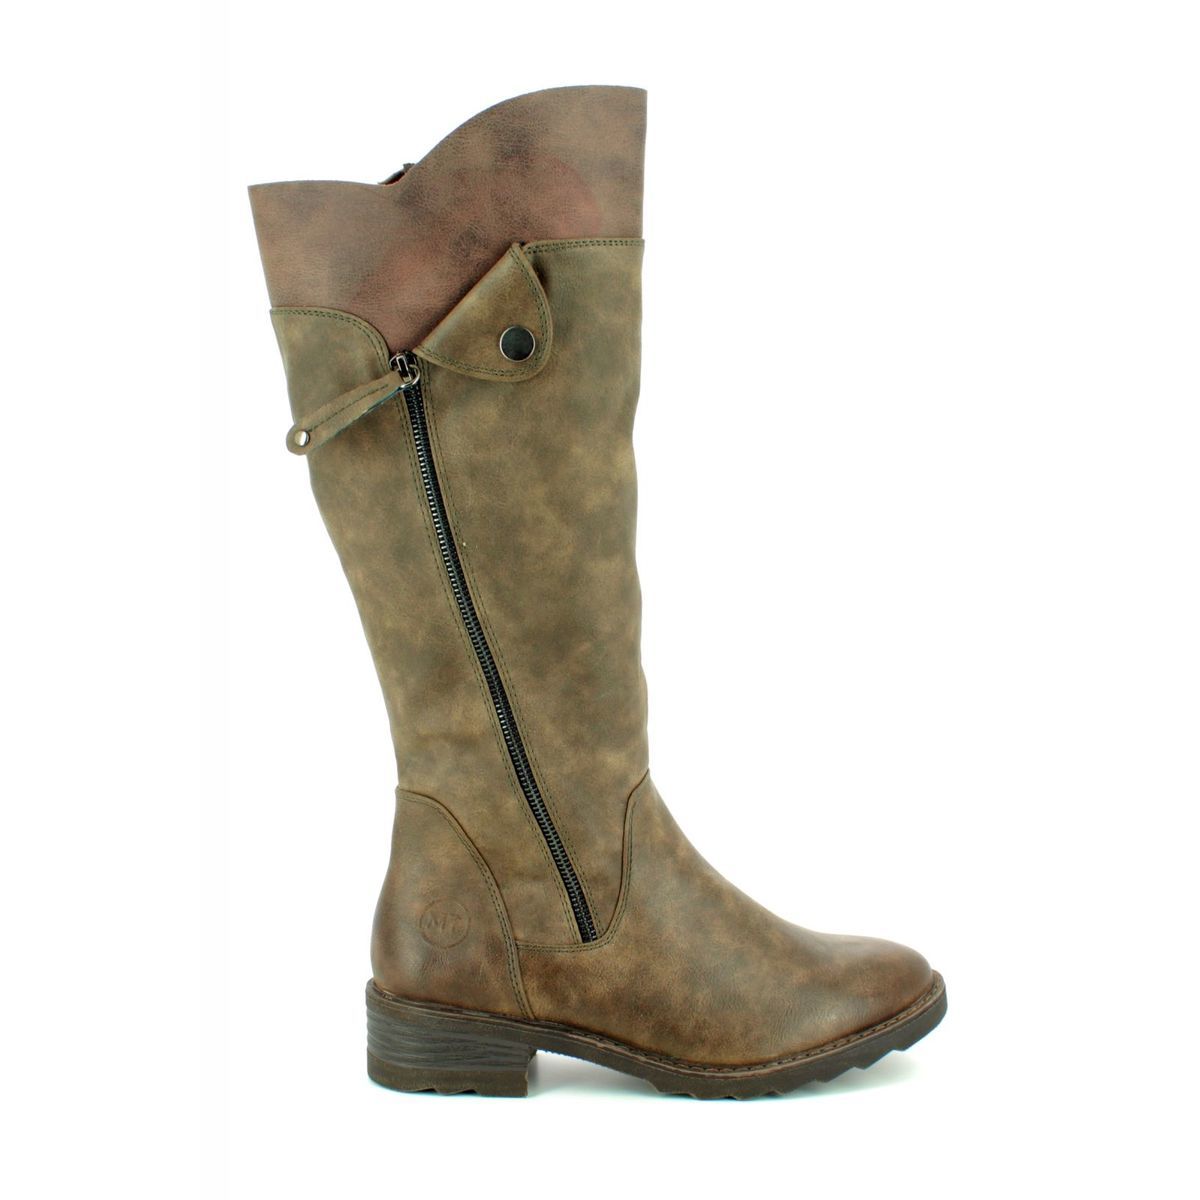 Marco Tozzi Dussi 85 26639-21-358 Brown knee-high boots